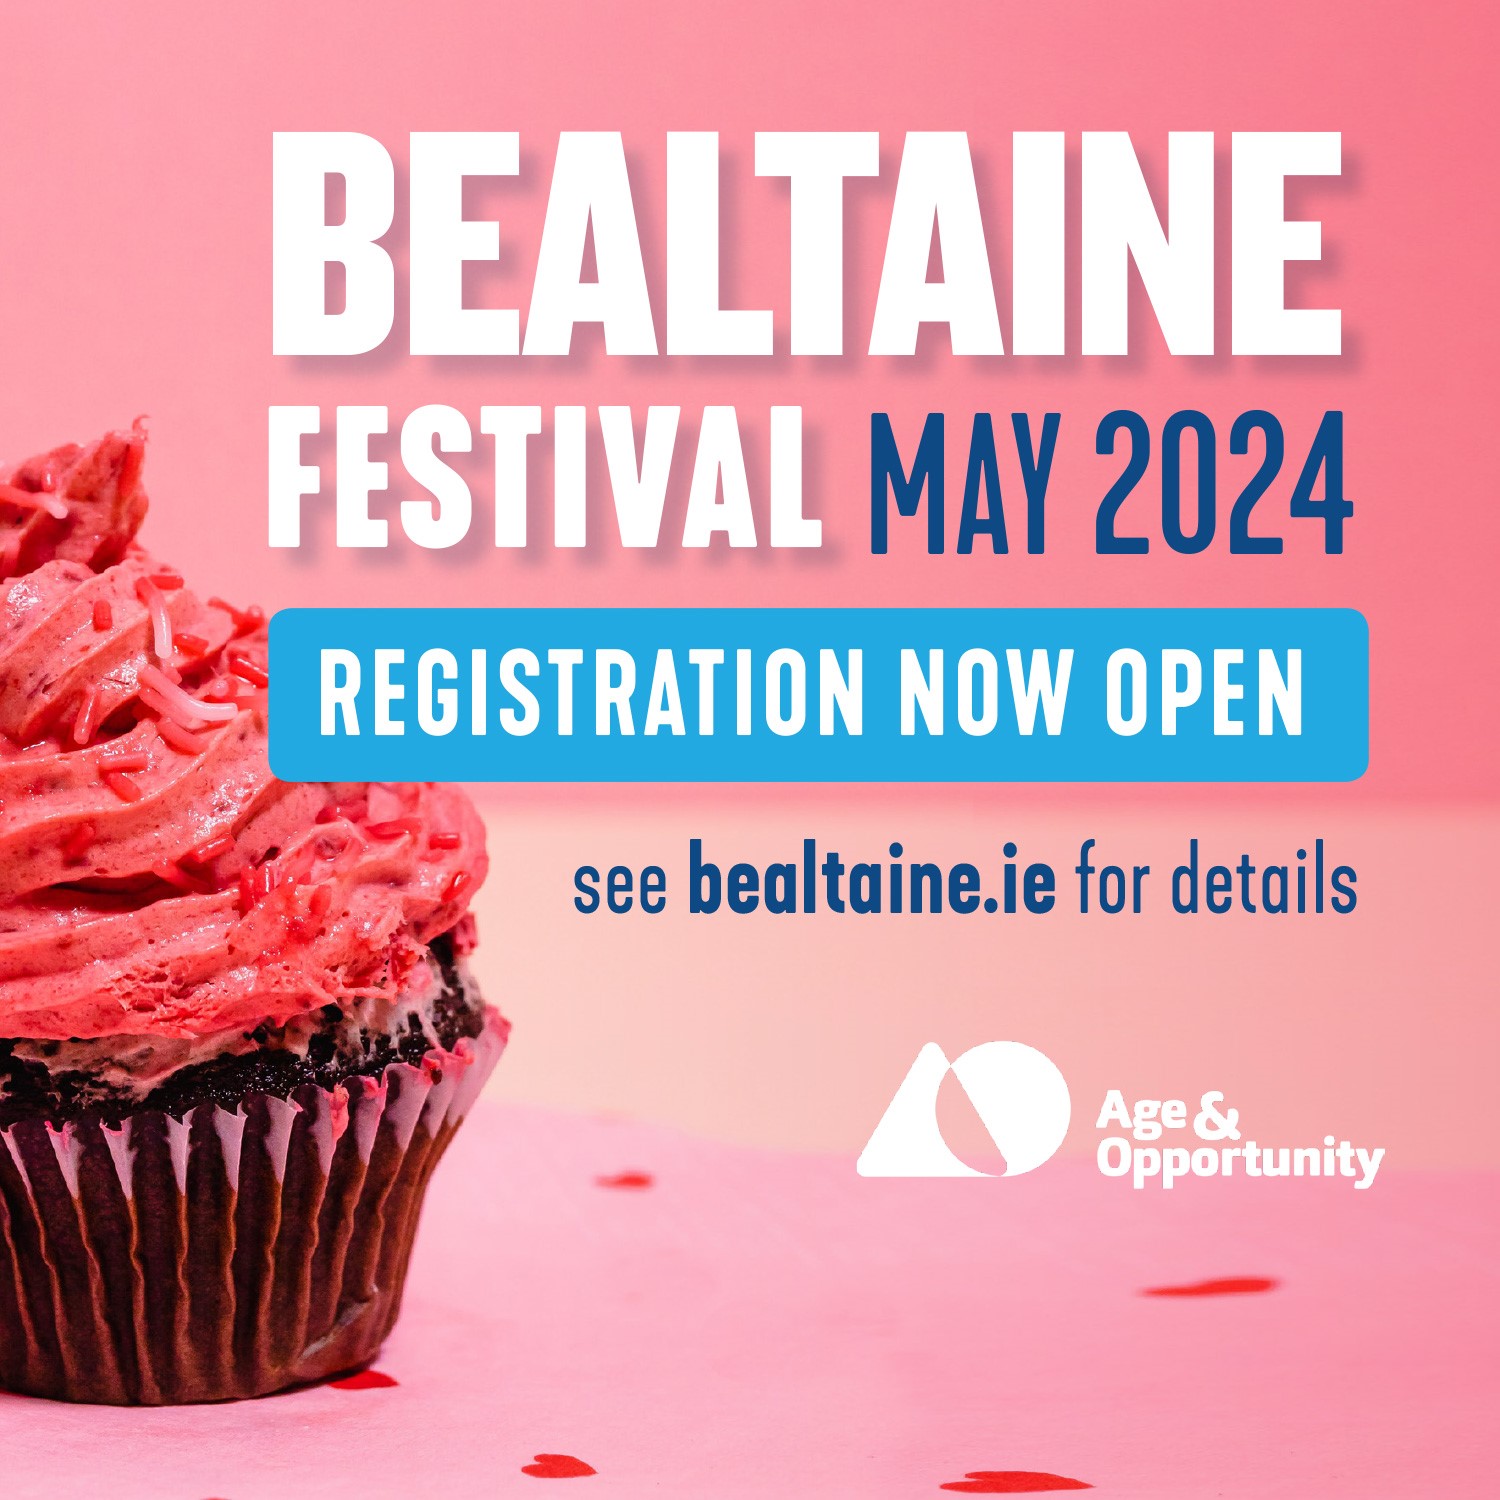 Advertisement for Bealtaine Festival in May 2024